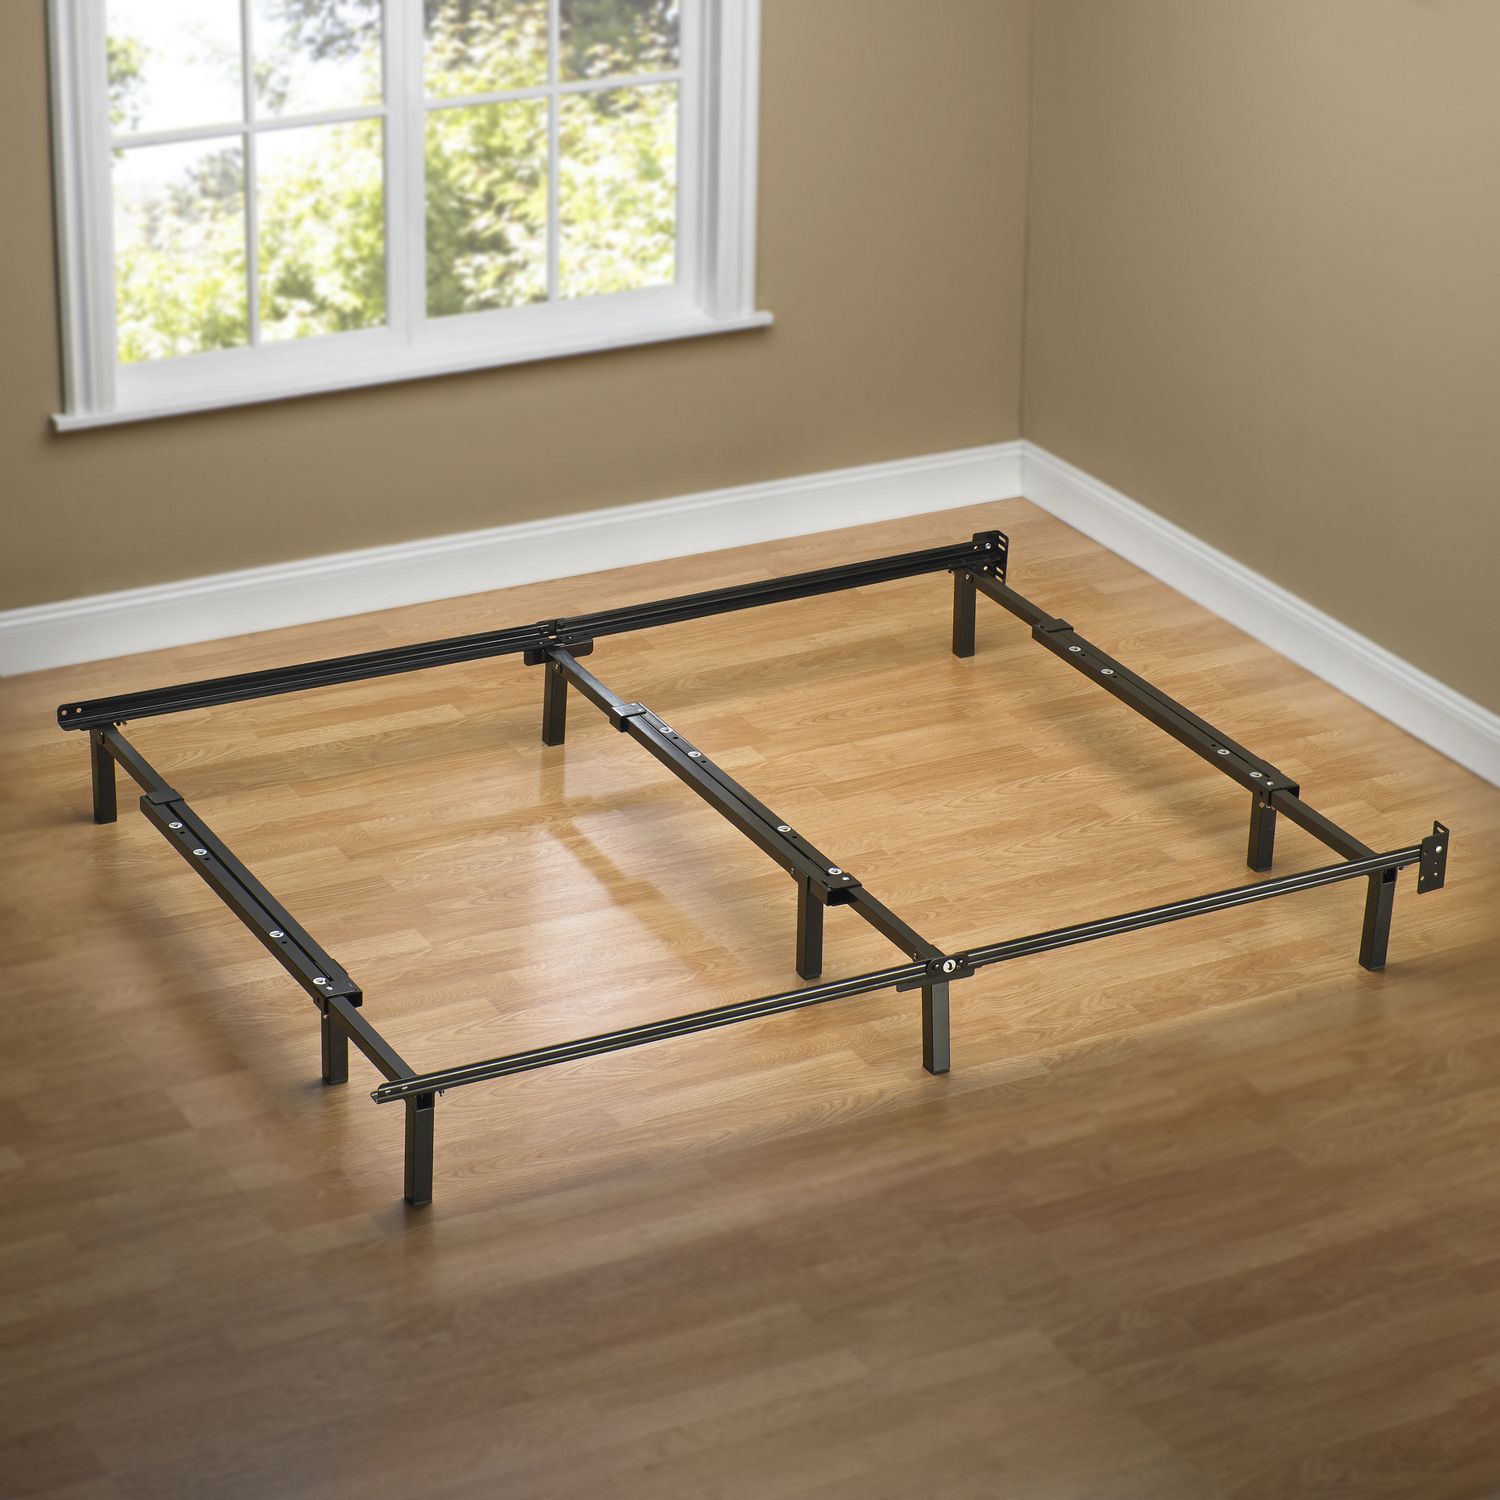 Sleep Revolution Compack Bed Frame, How Much Are King Size Bed Frames